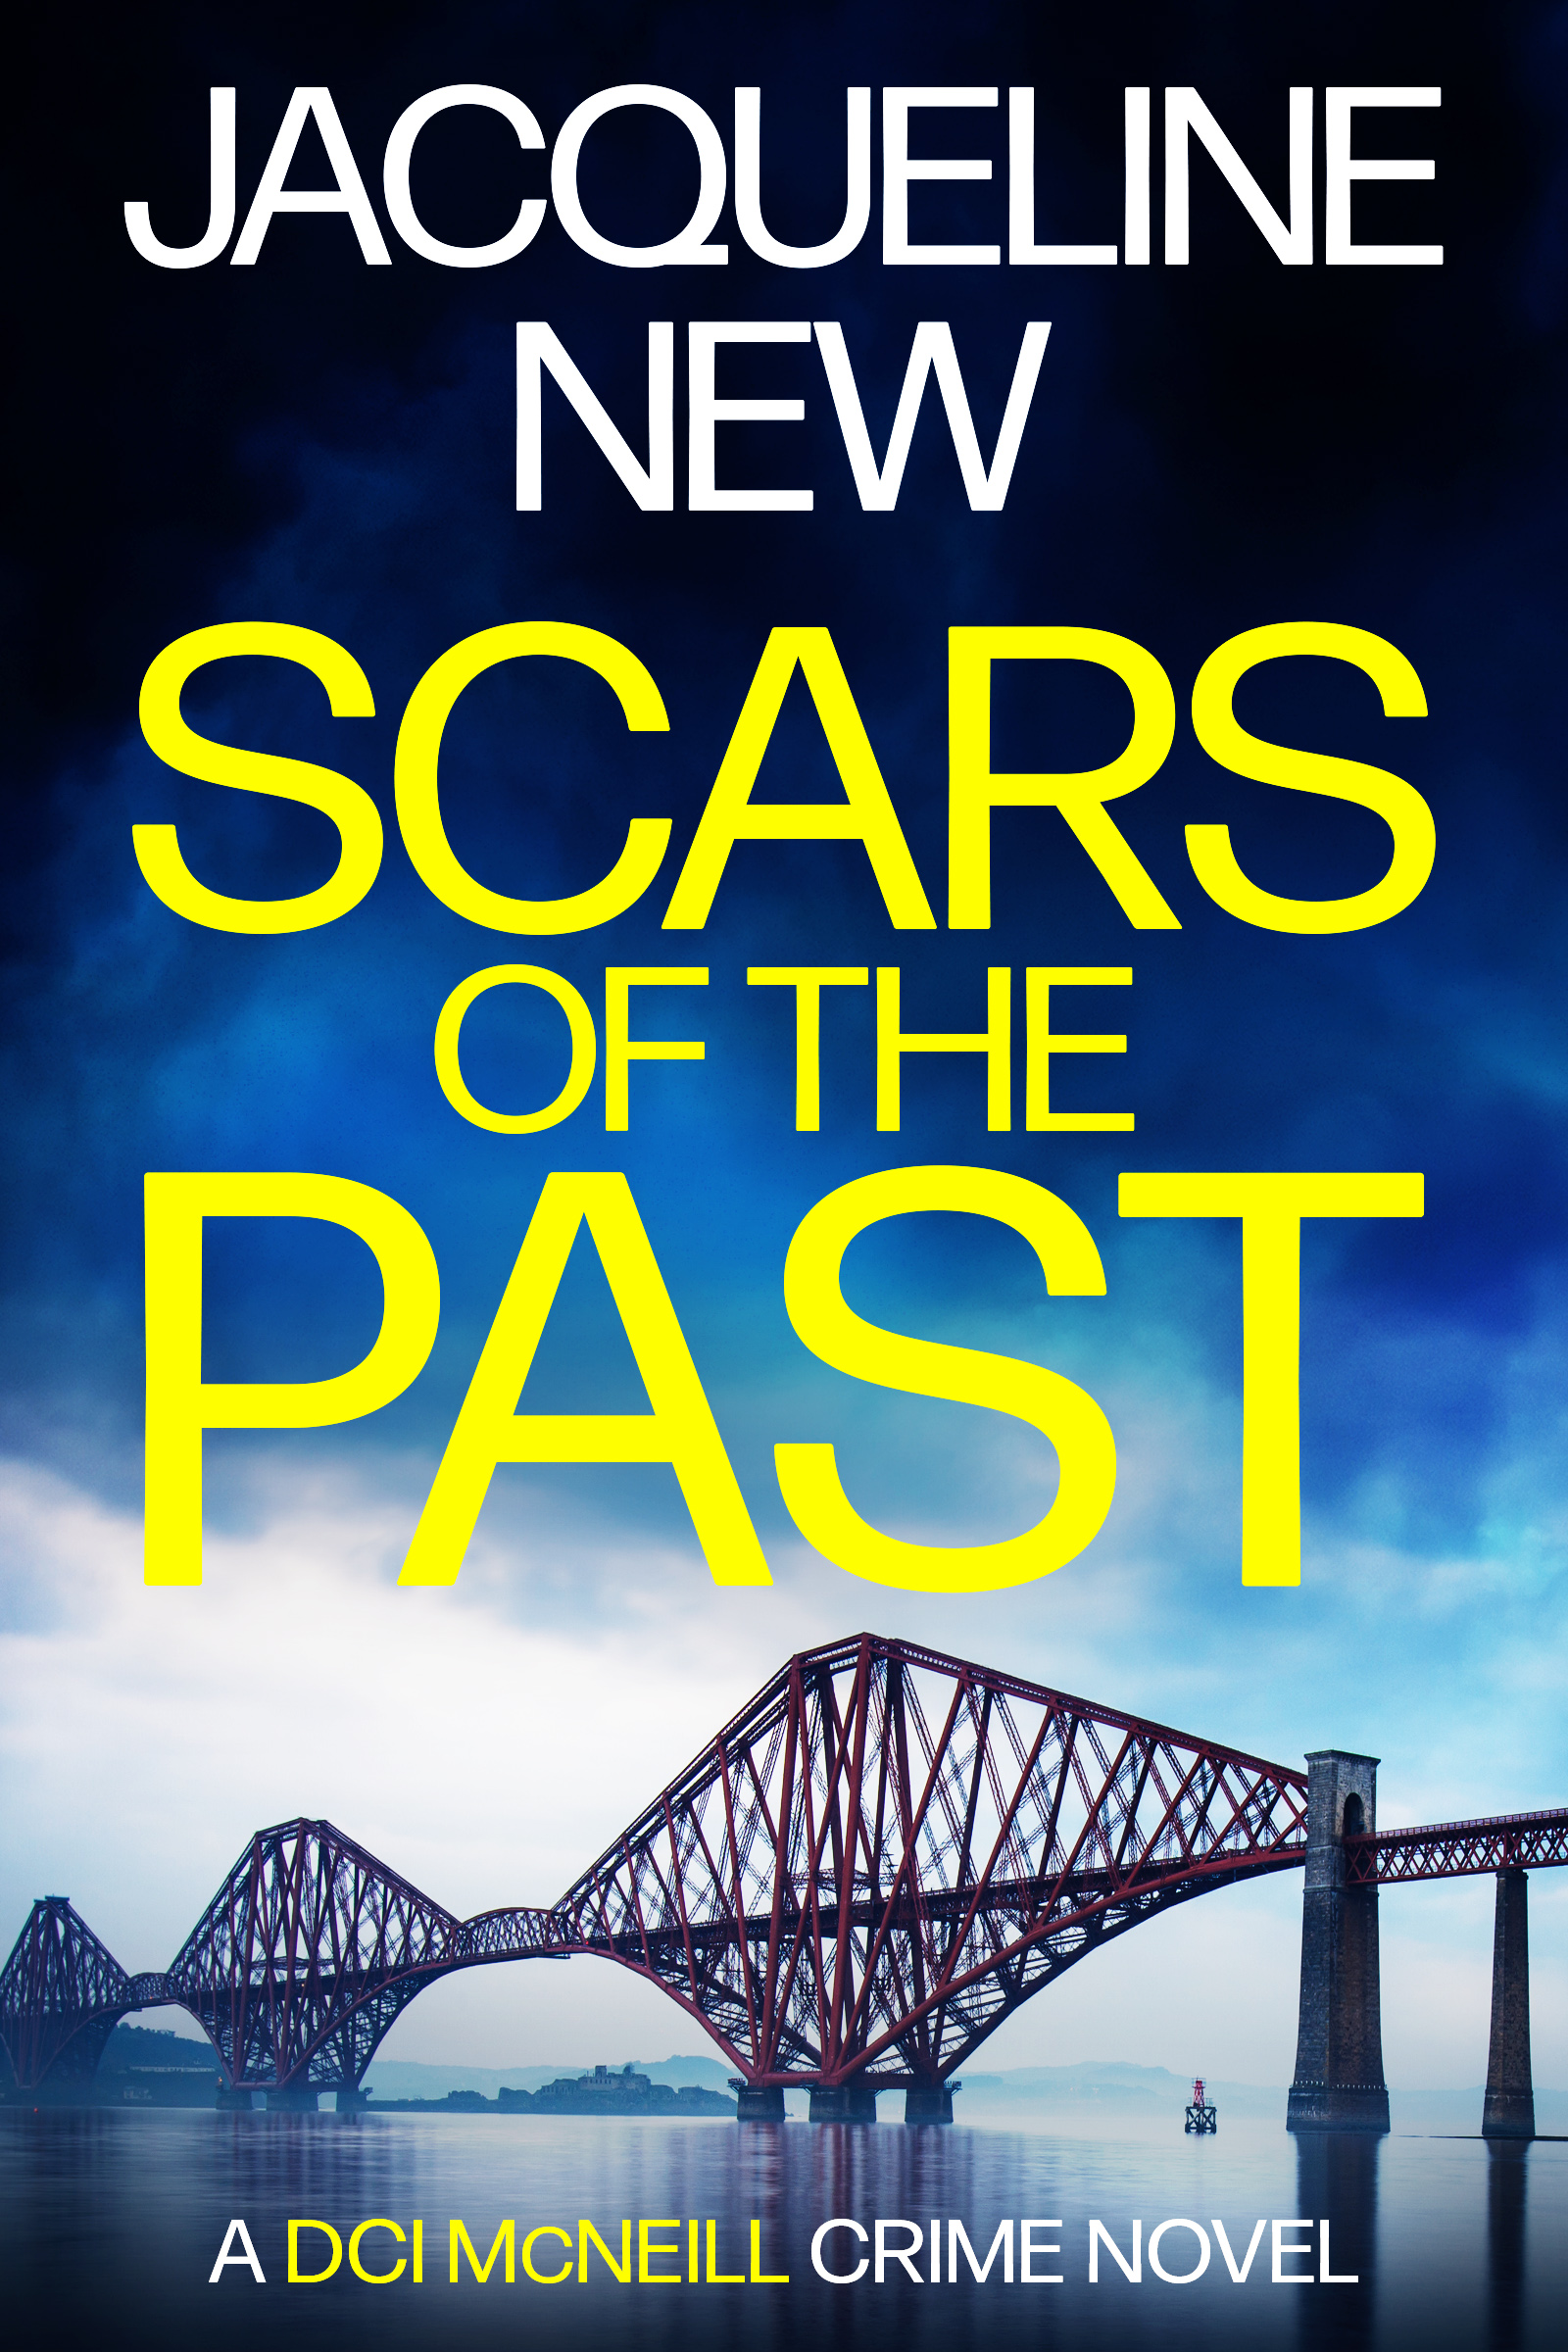 Scars of the Past book 1 in the bestselling Scottish crime thriller series featuring DCI Callum McNeill by Jacqueline New